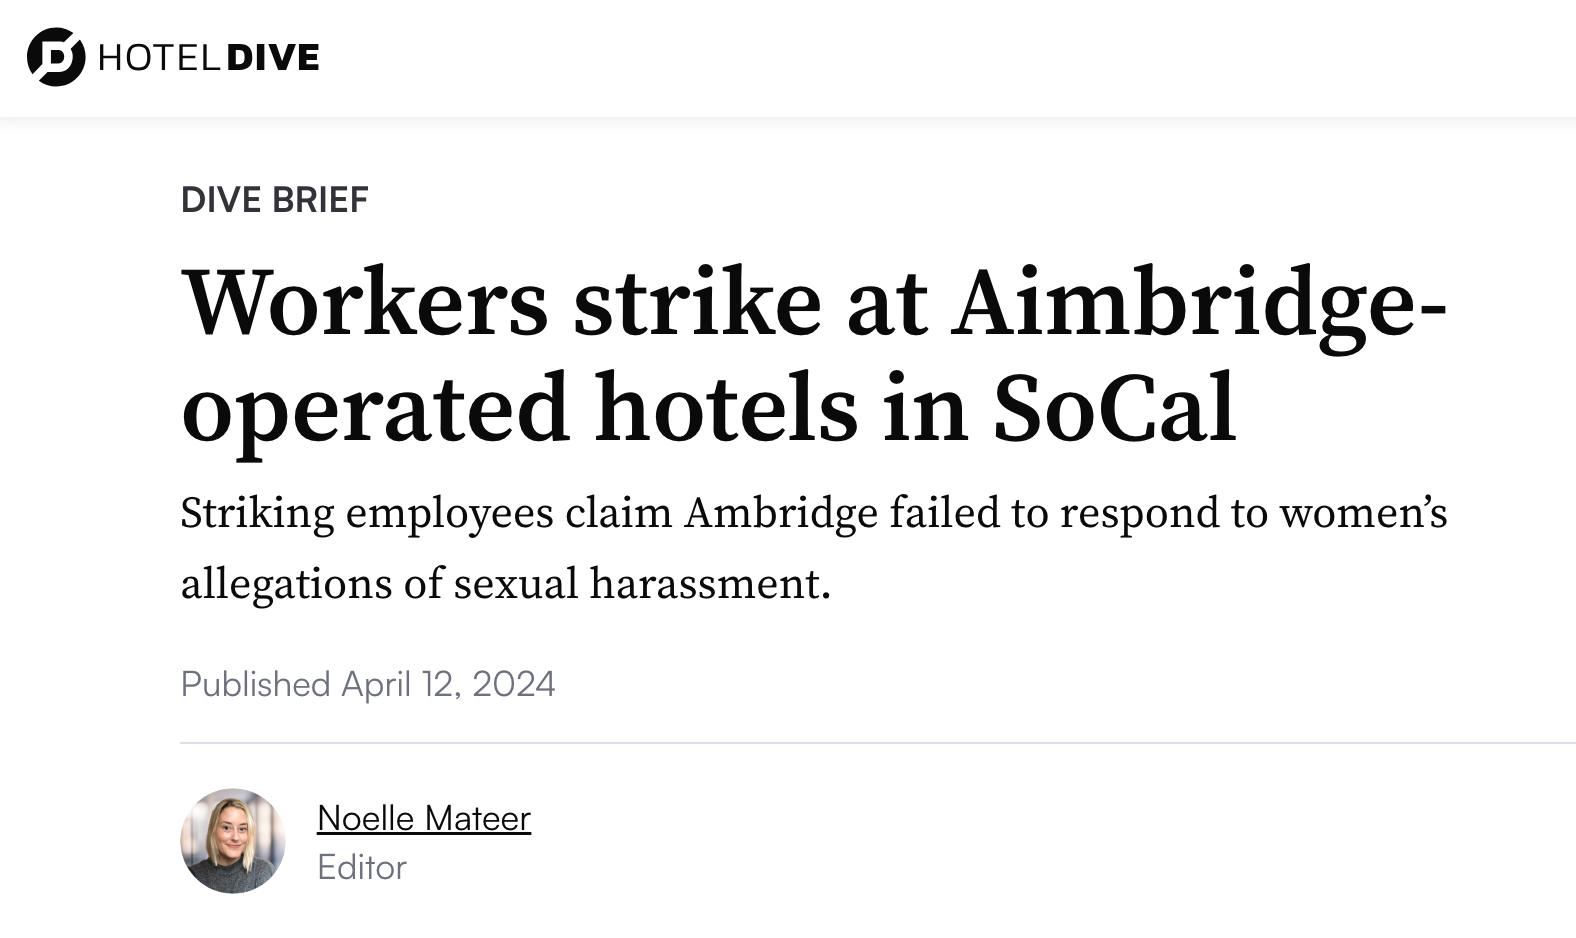 Masthead of Hotel Dive and headline of an article titled "Workers strike at Aimbridge-operated hotels in SoCal" dated 4-12-2024